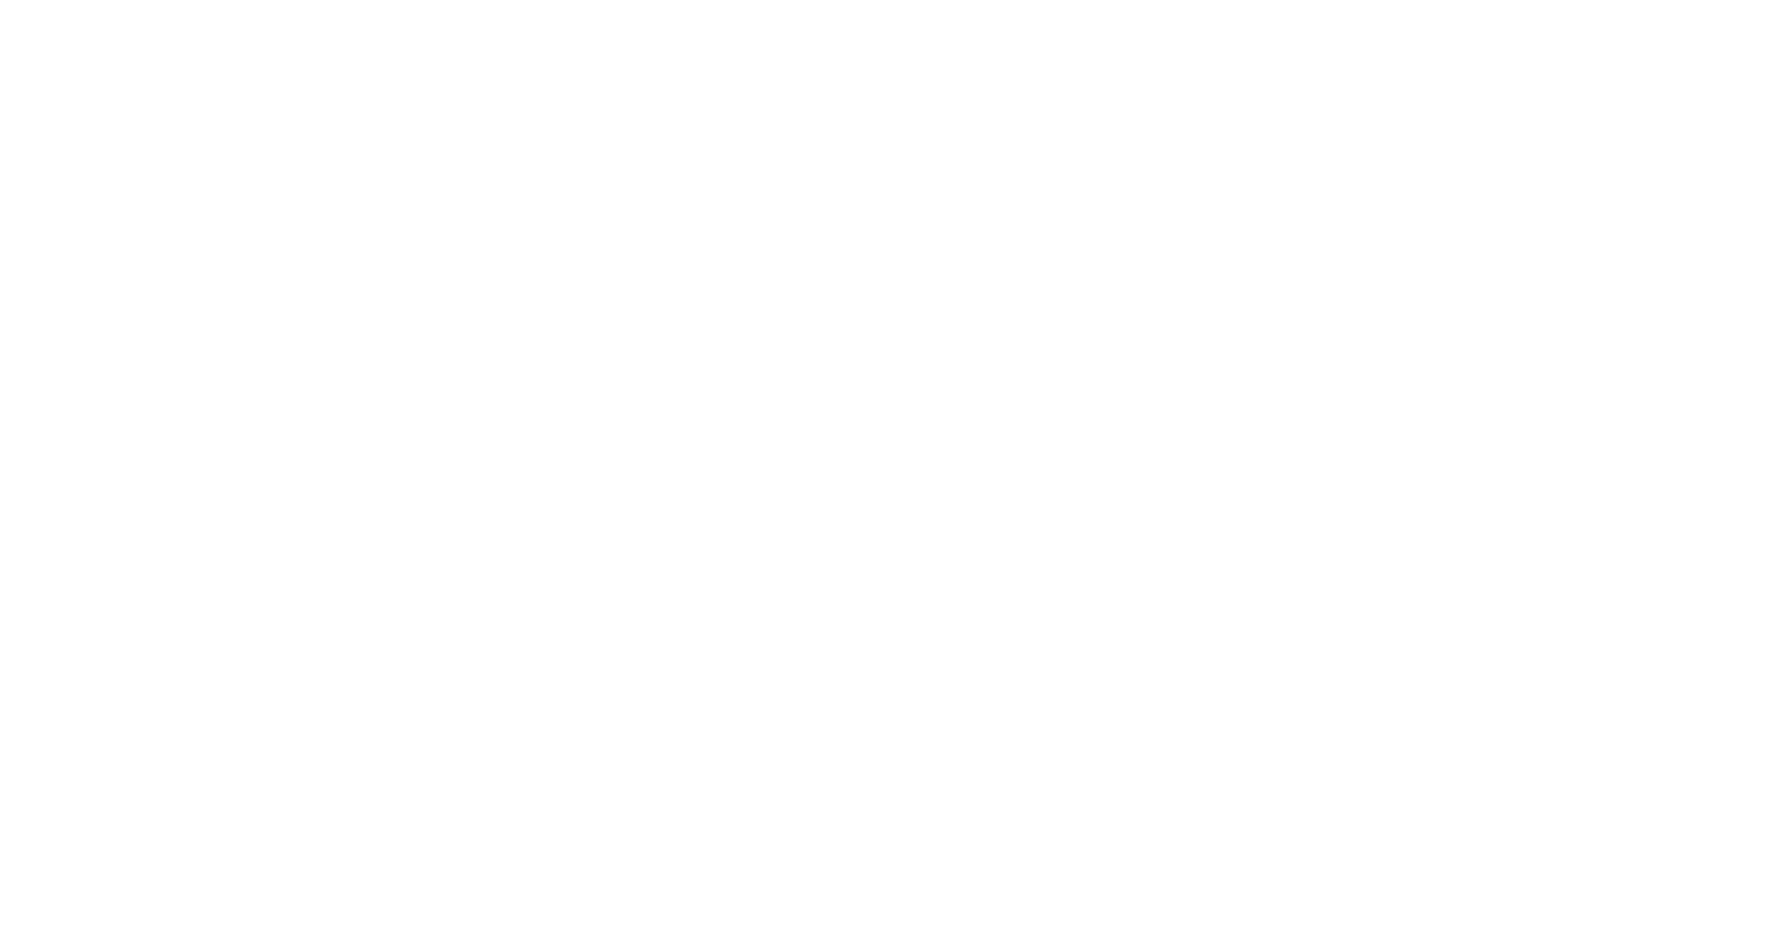 SOUP MEAL